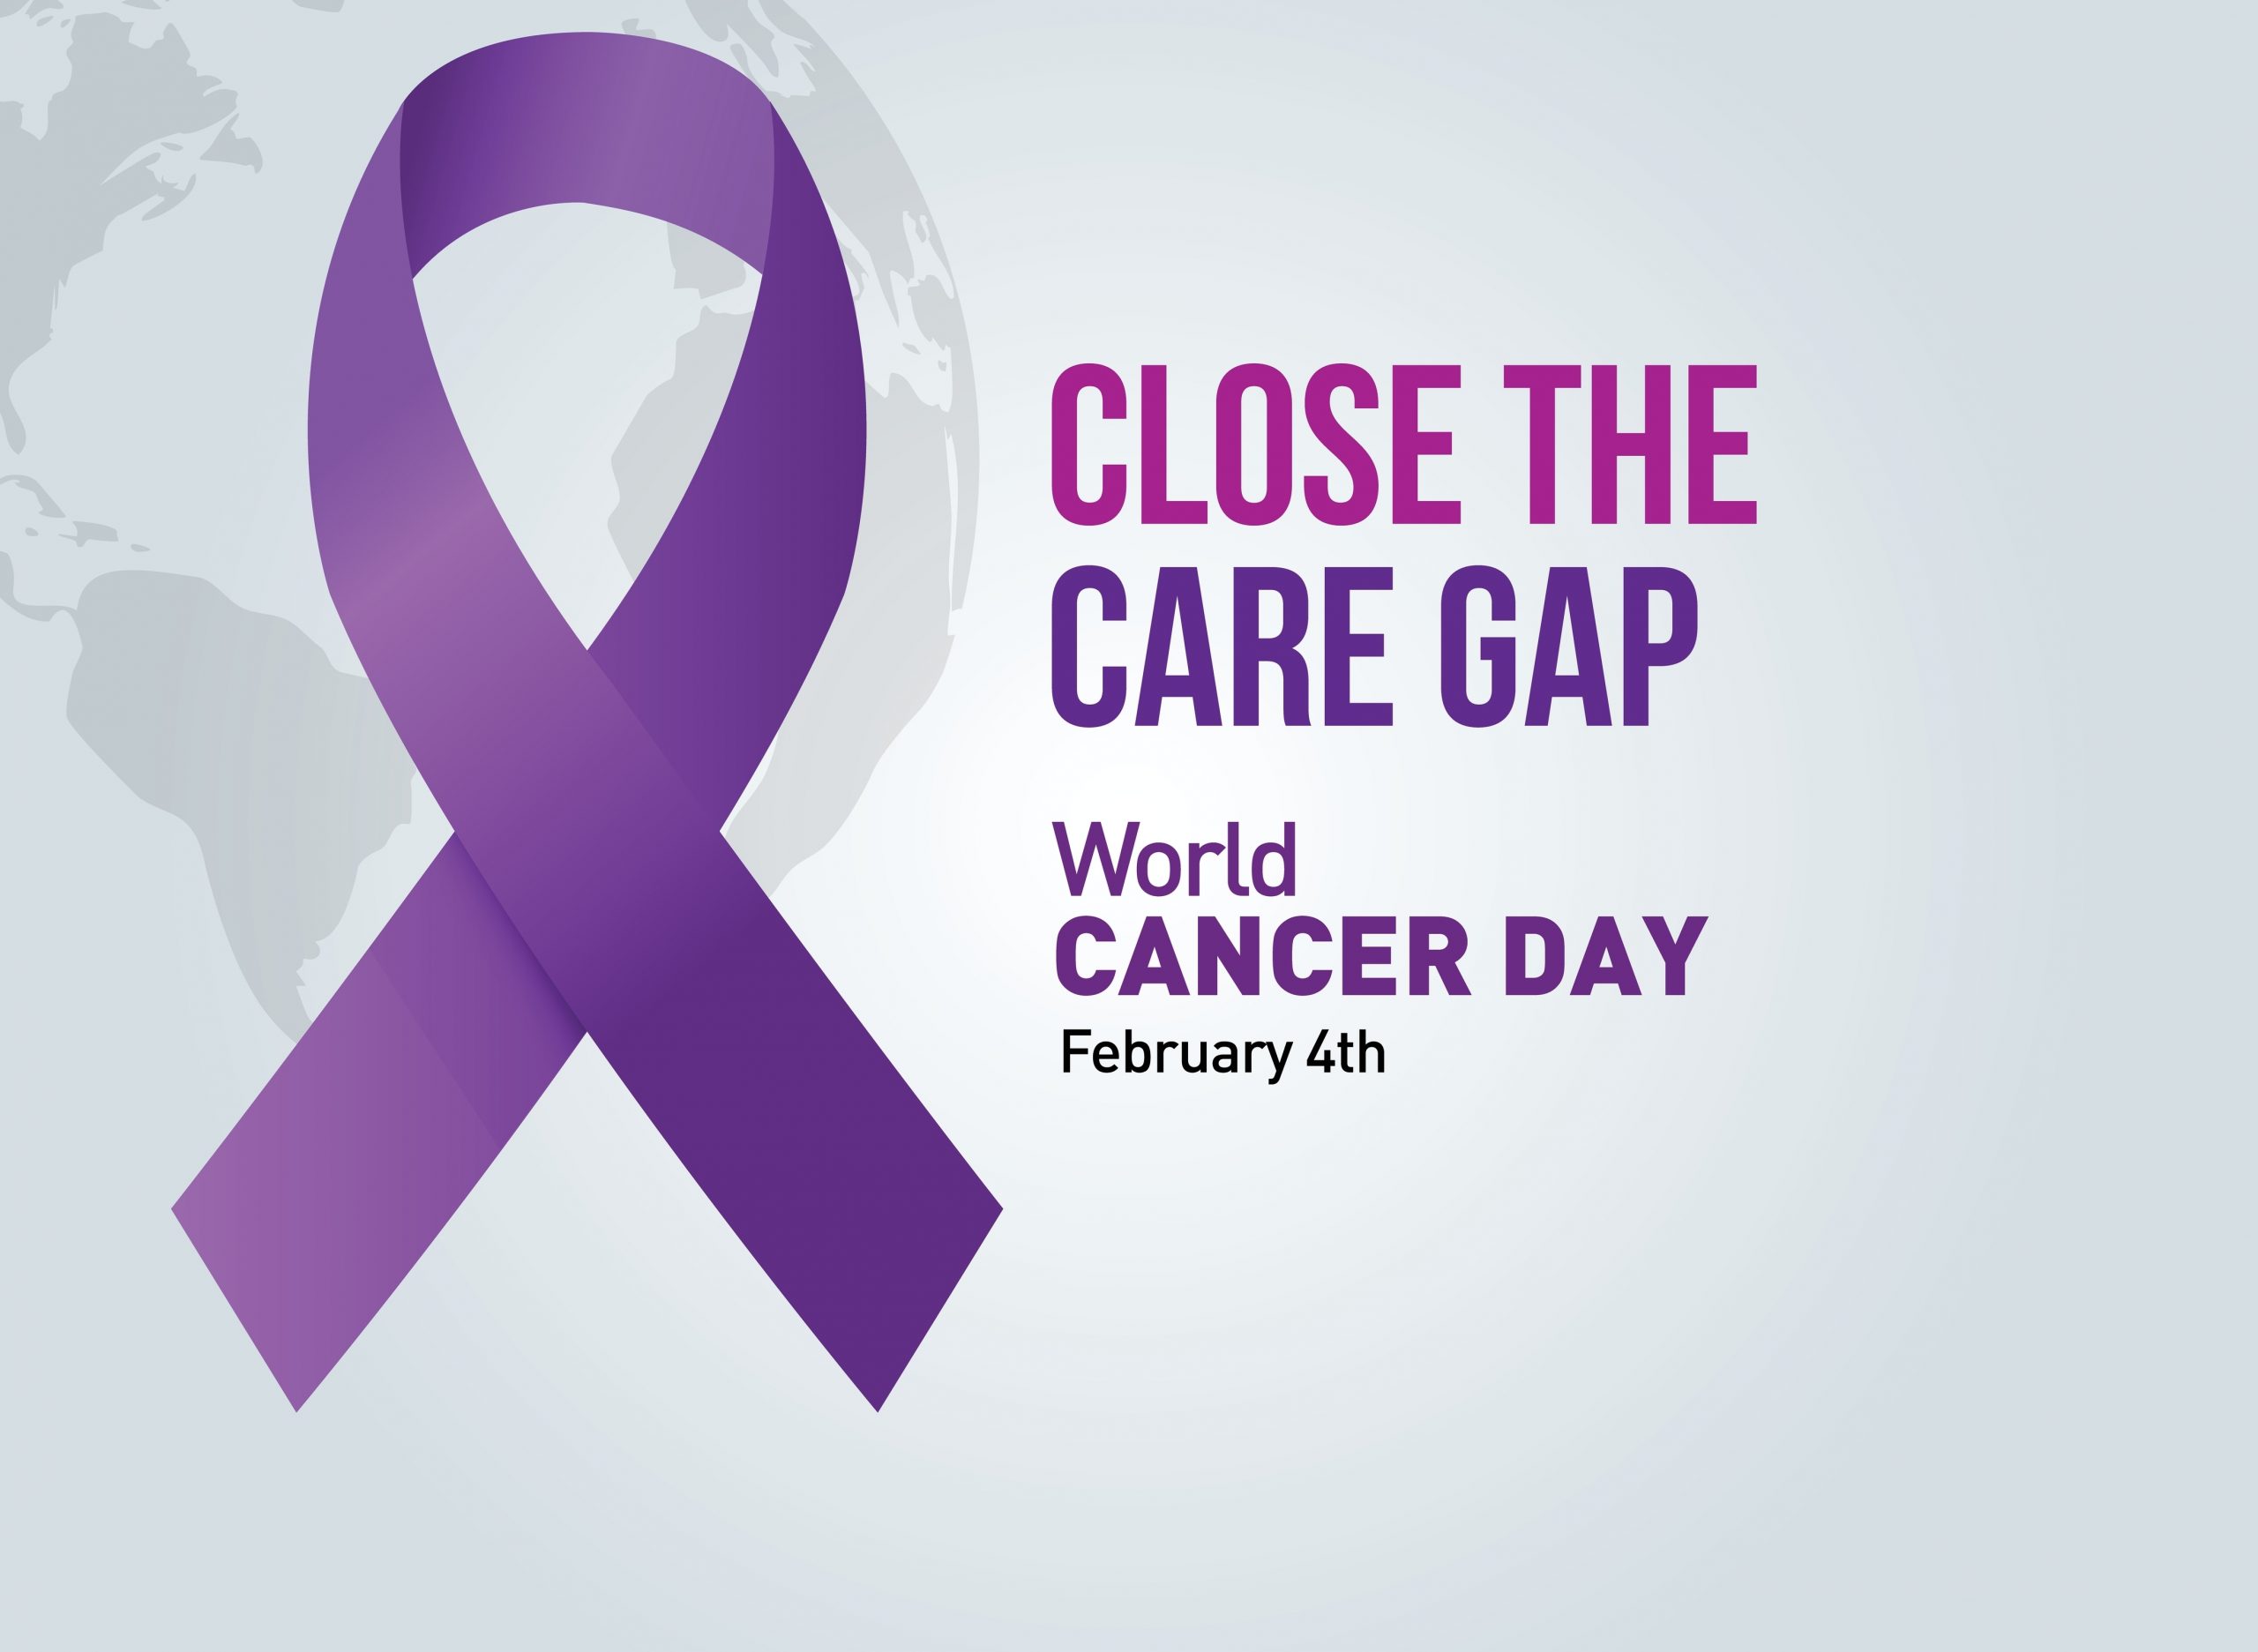 CLOSING THE CANCER CARE GAP